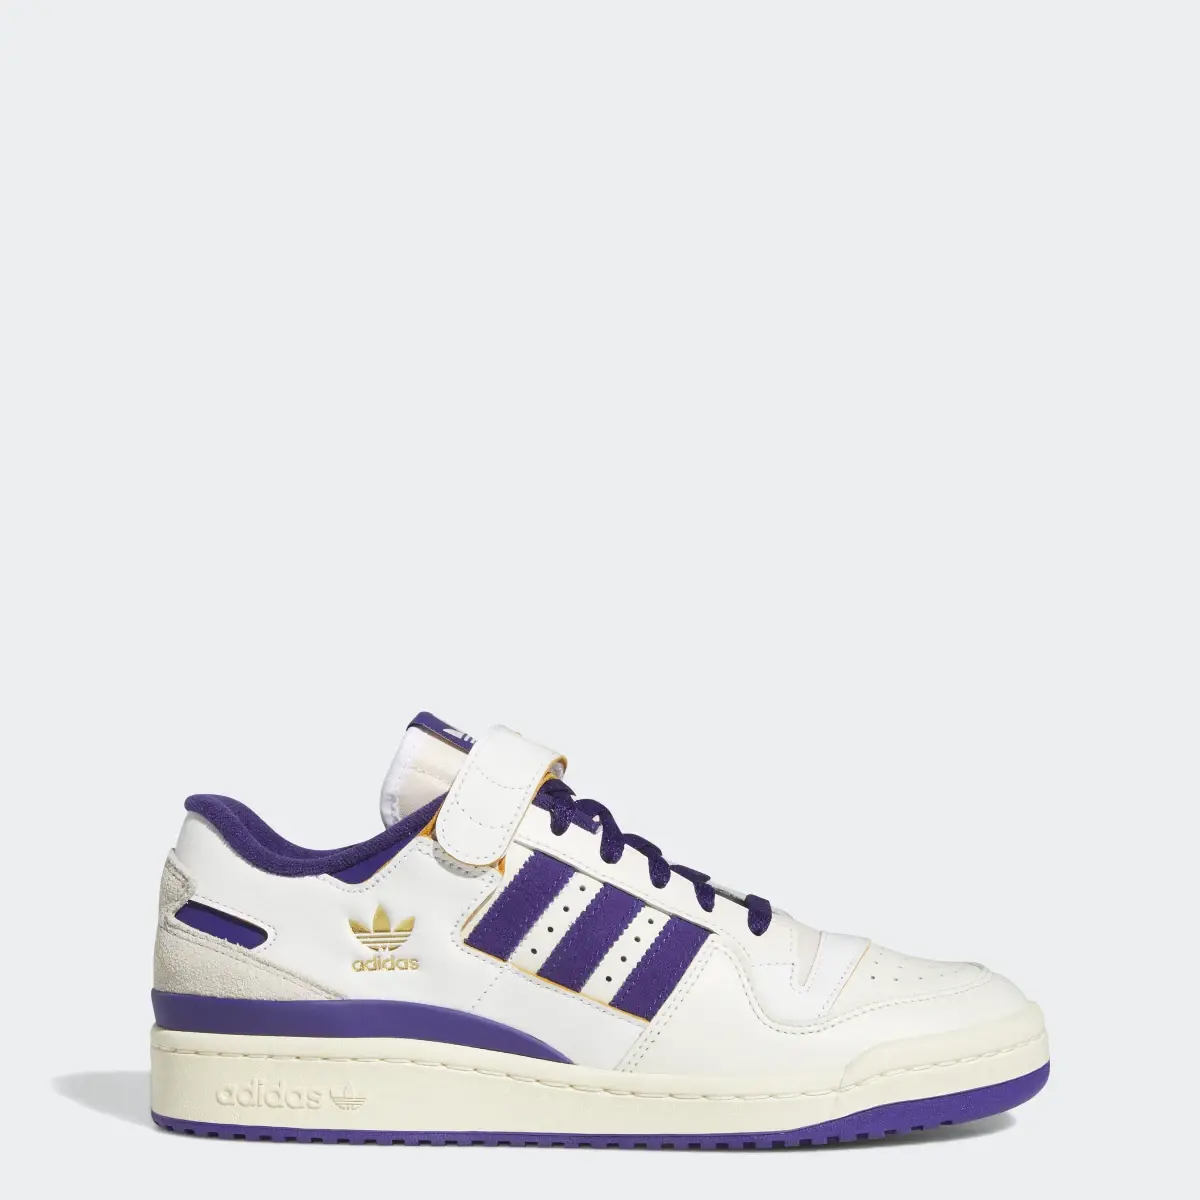 Adidas Forum 84 Low Shoes. 1